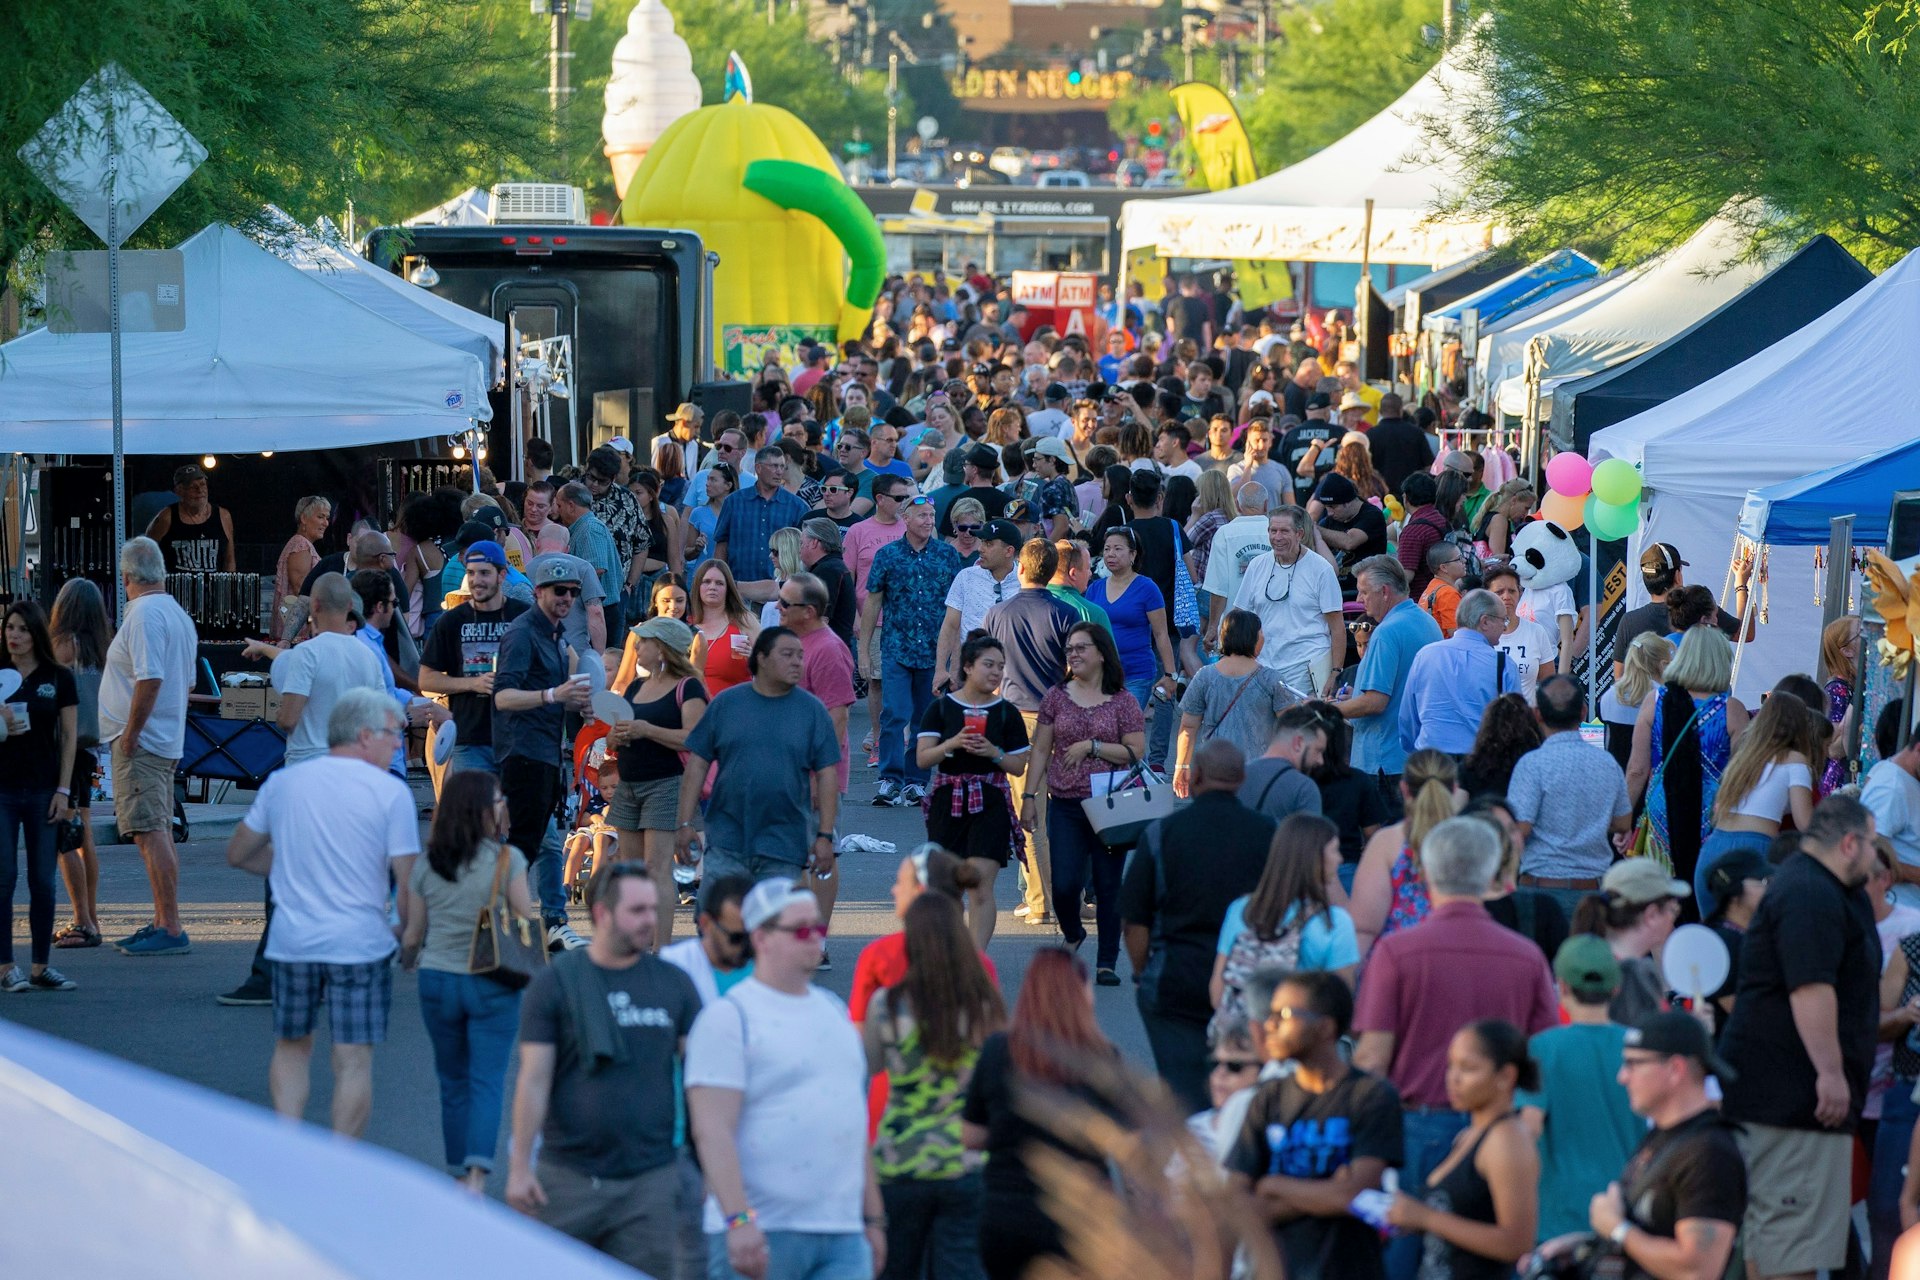 A large crowd fills a pedestrianized area lined with stalls at Las Vegas' First Friday Festival.